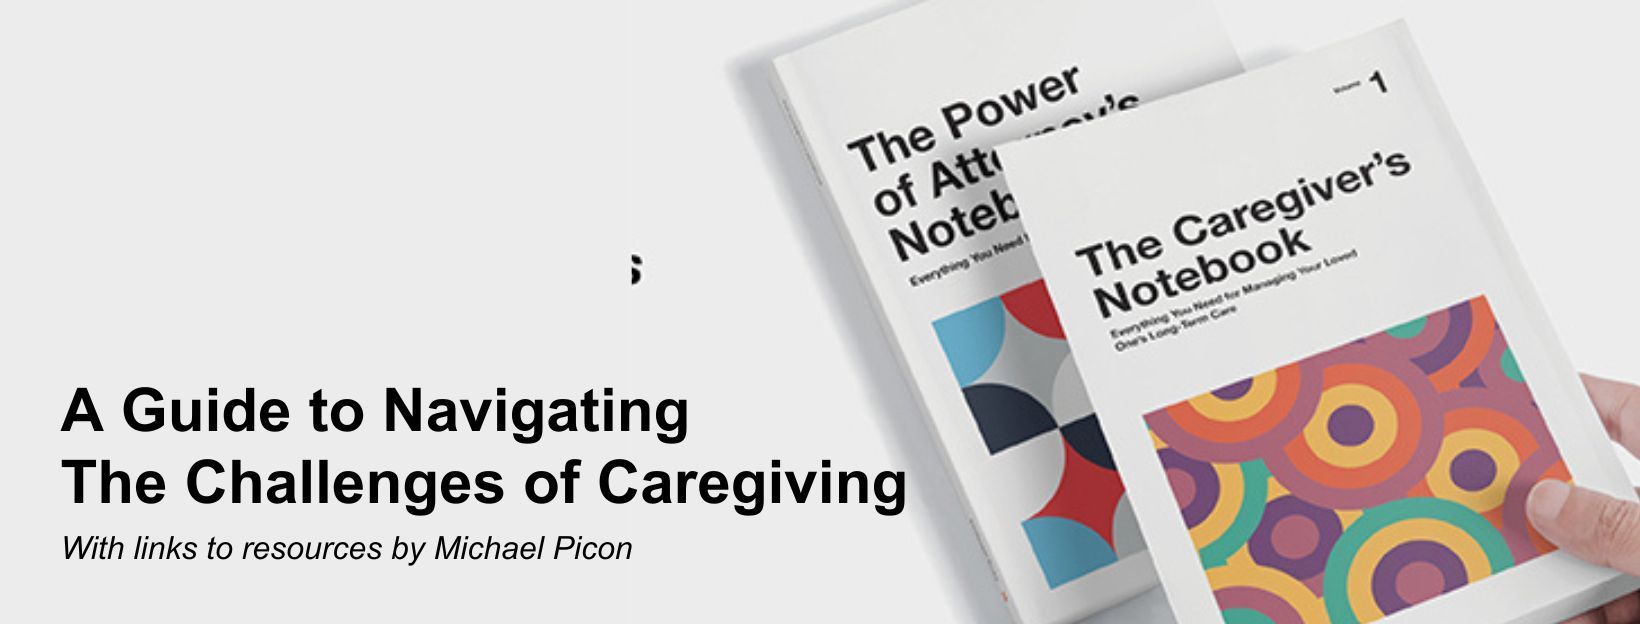 A Guide to Navigating The Challenges of Caregiving